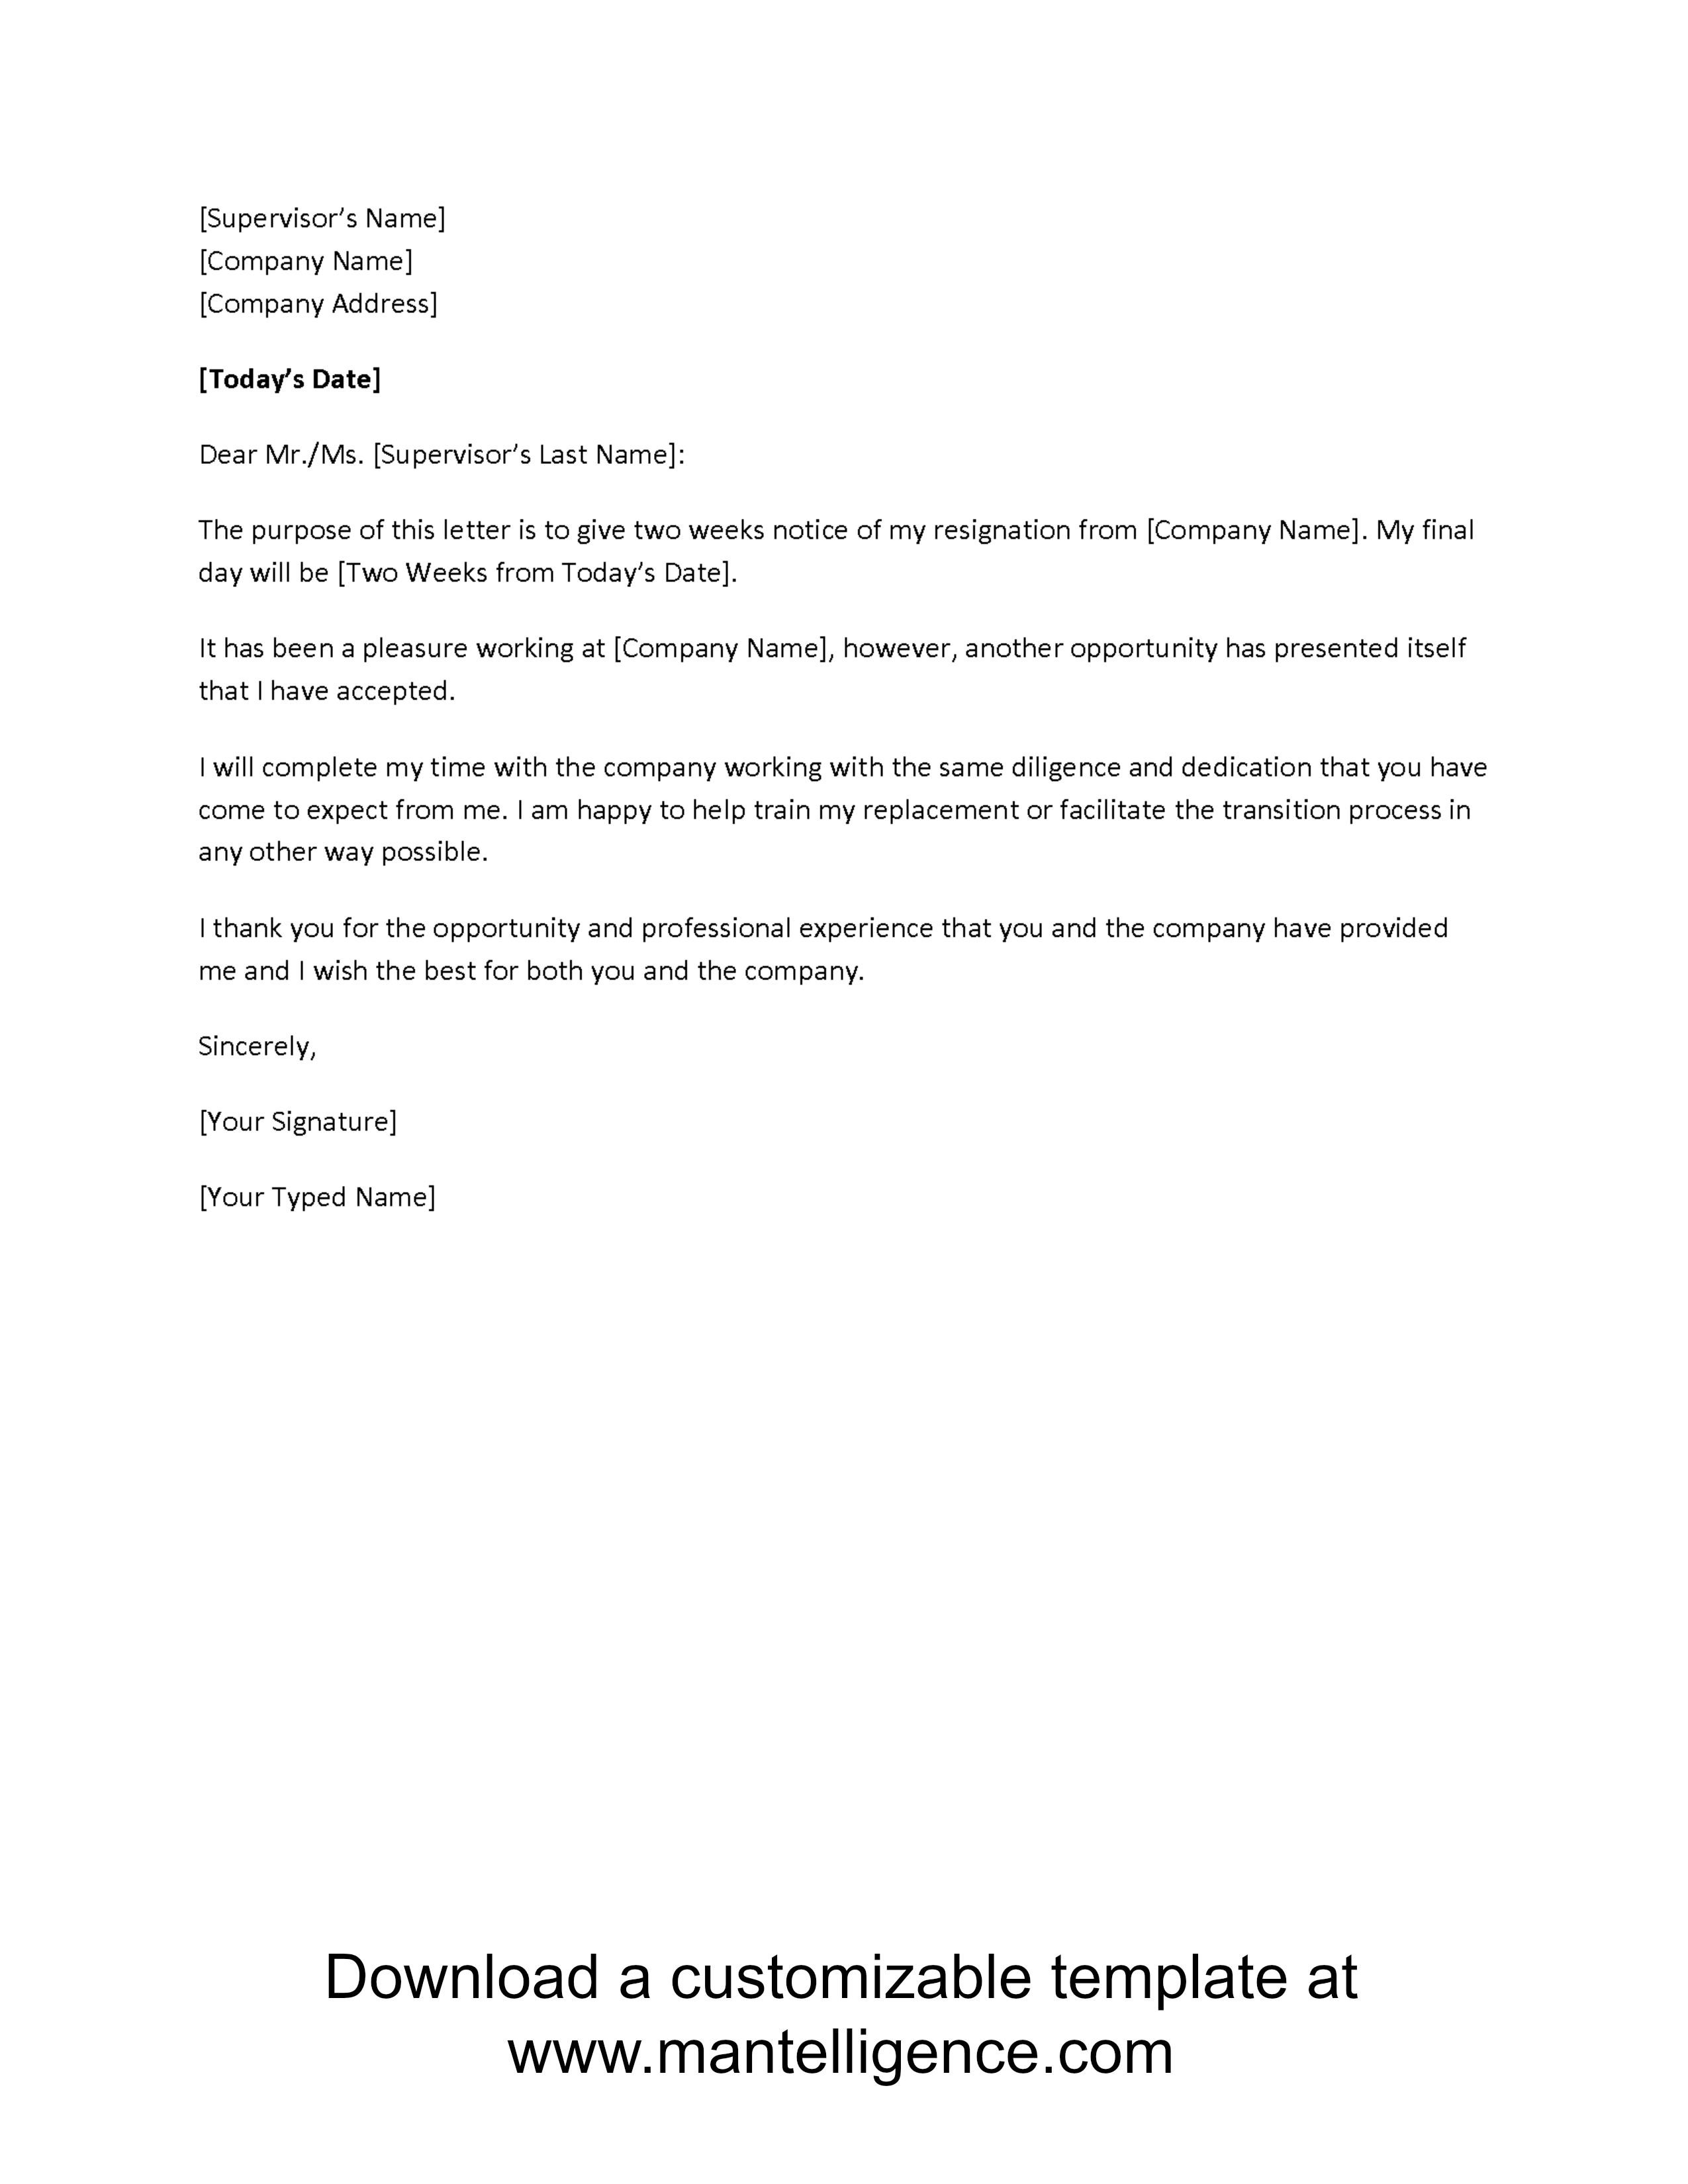 3 Highly Professional Two Weeks Notice Letter Templates Throughout Two Week Notice Template Word